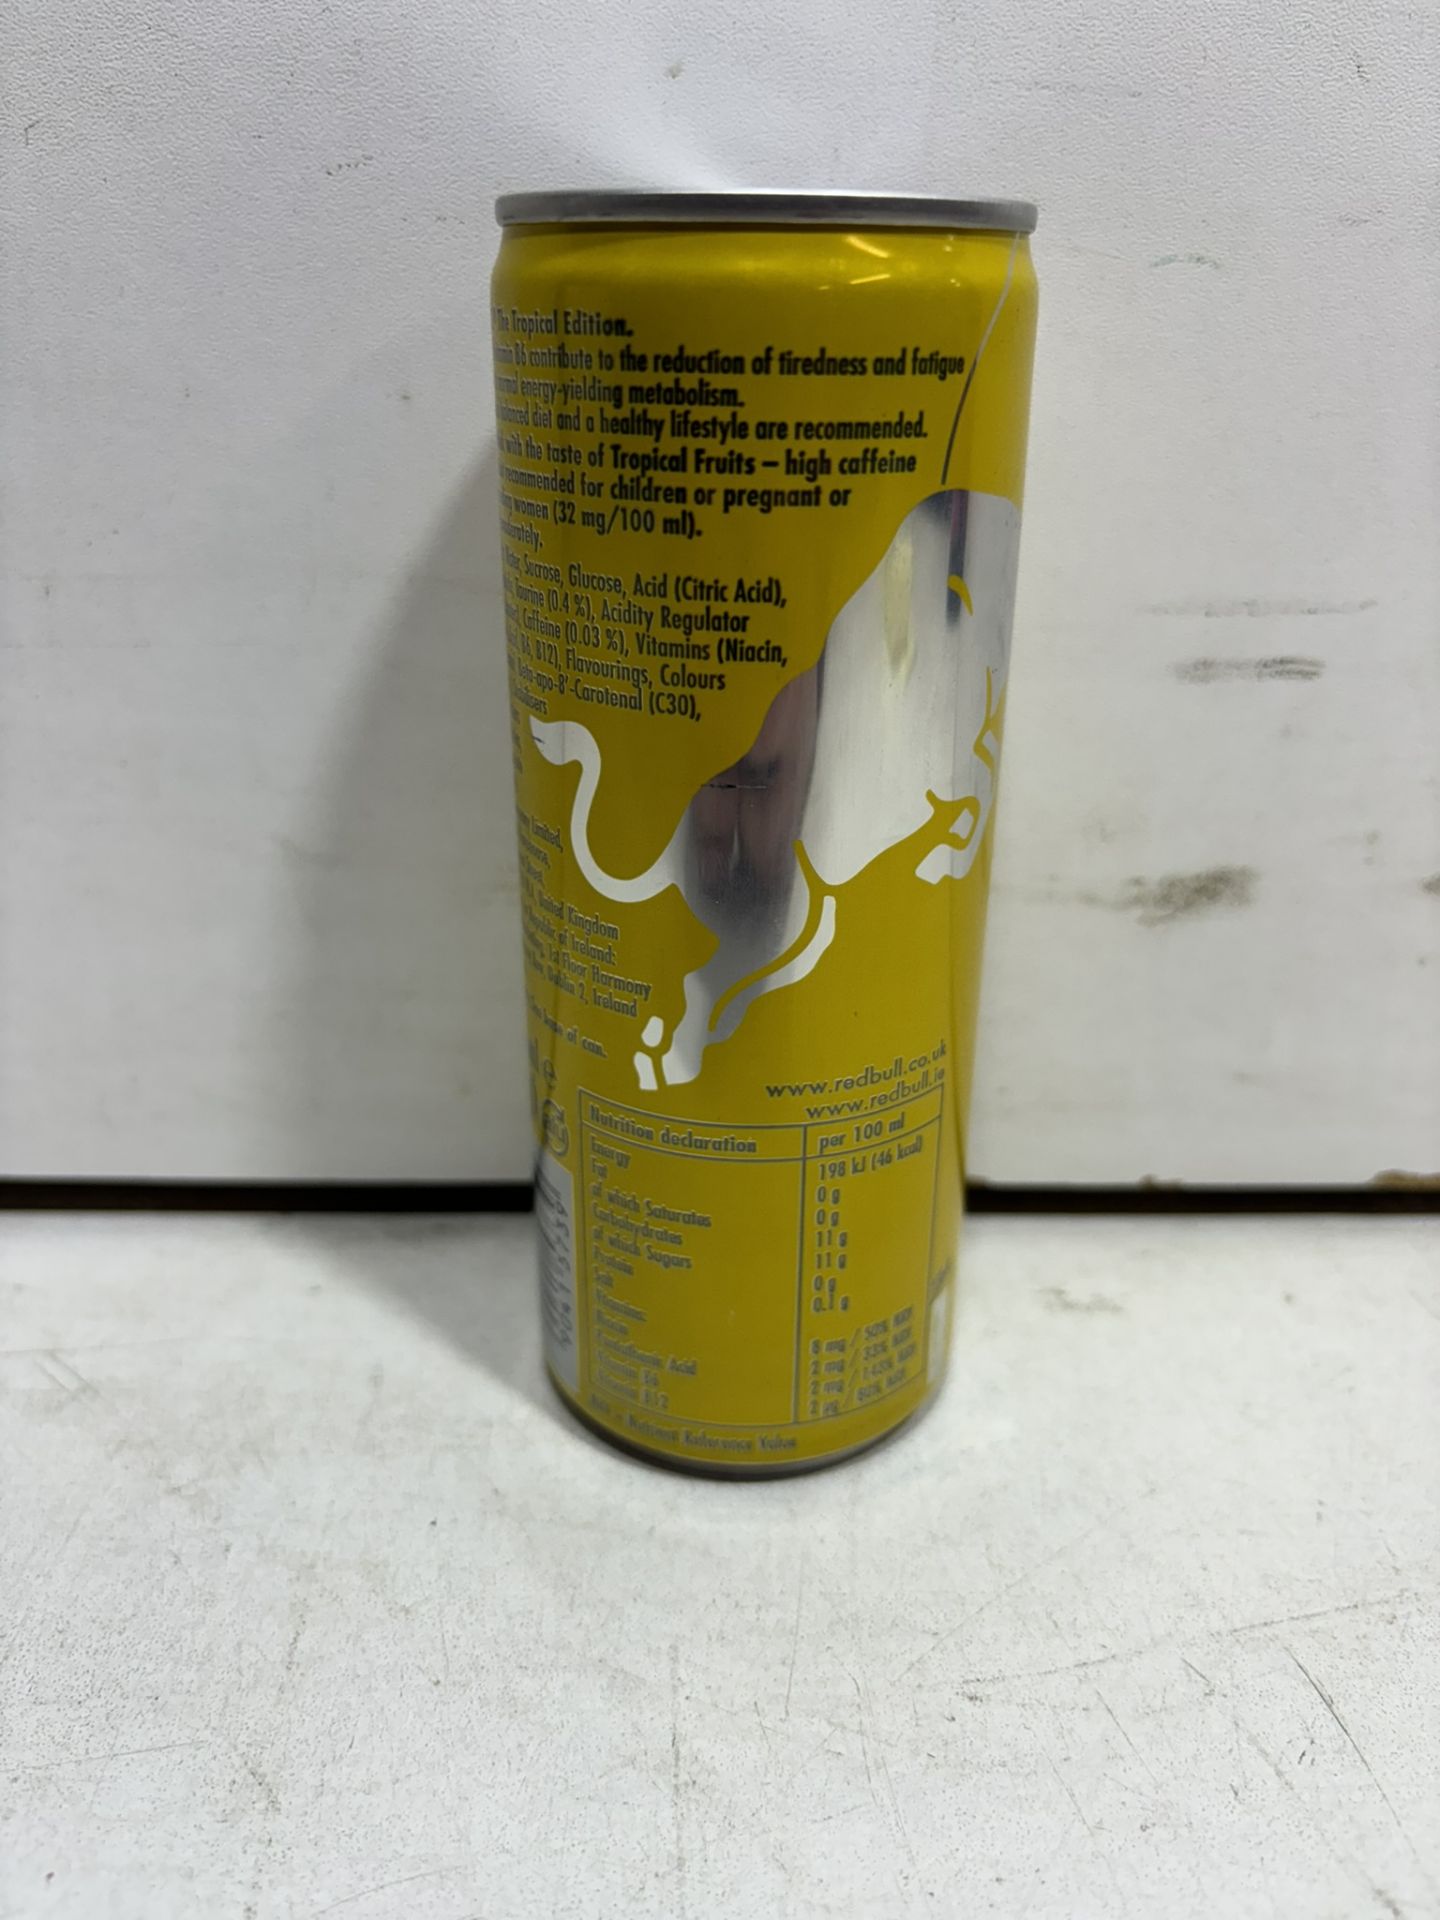 60 X Cans Of Red Bull 'The Tropical Edition' Tropical Fruits Energy Drinks, 250Ml - Image 3 of 5